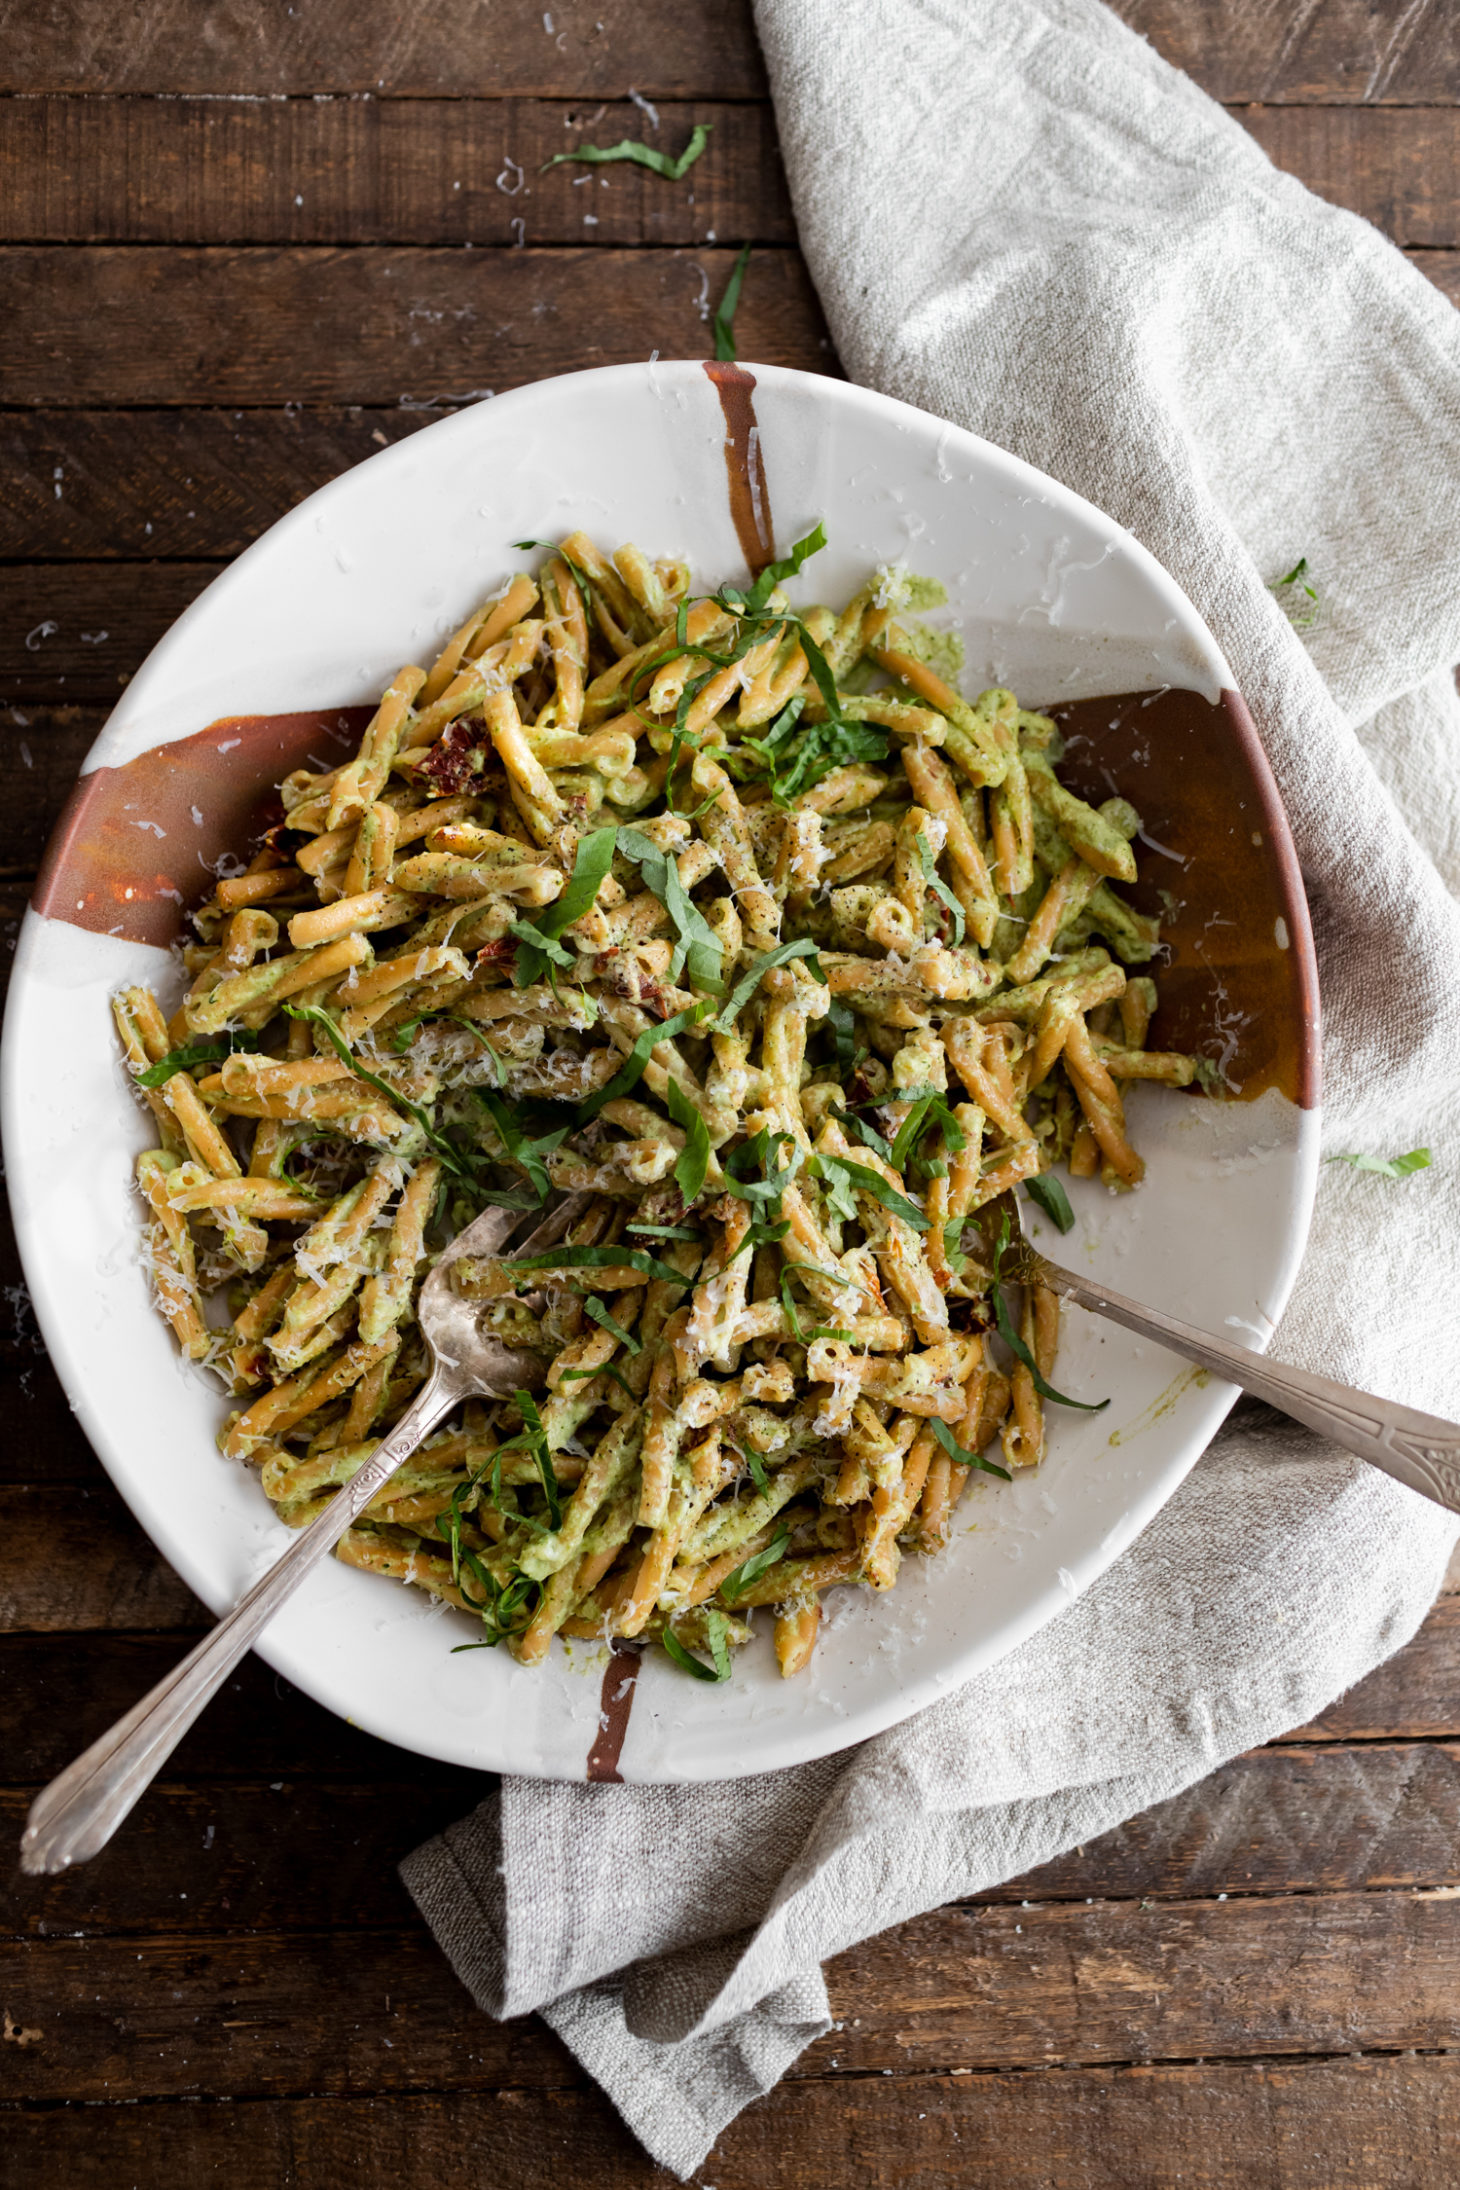 Photograph of a full, large white bowl of pasta tossed with a broccoli pesto. 